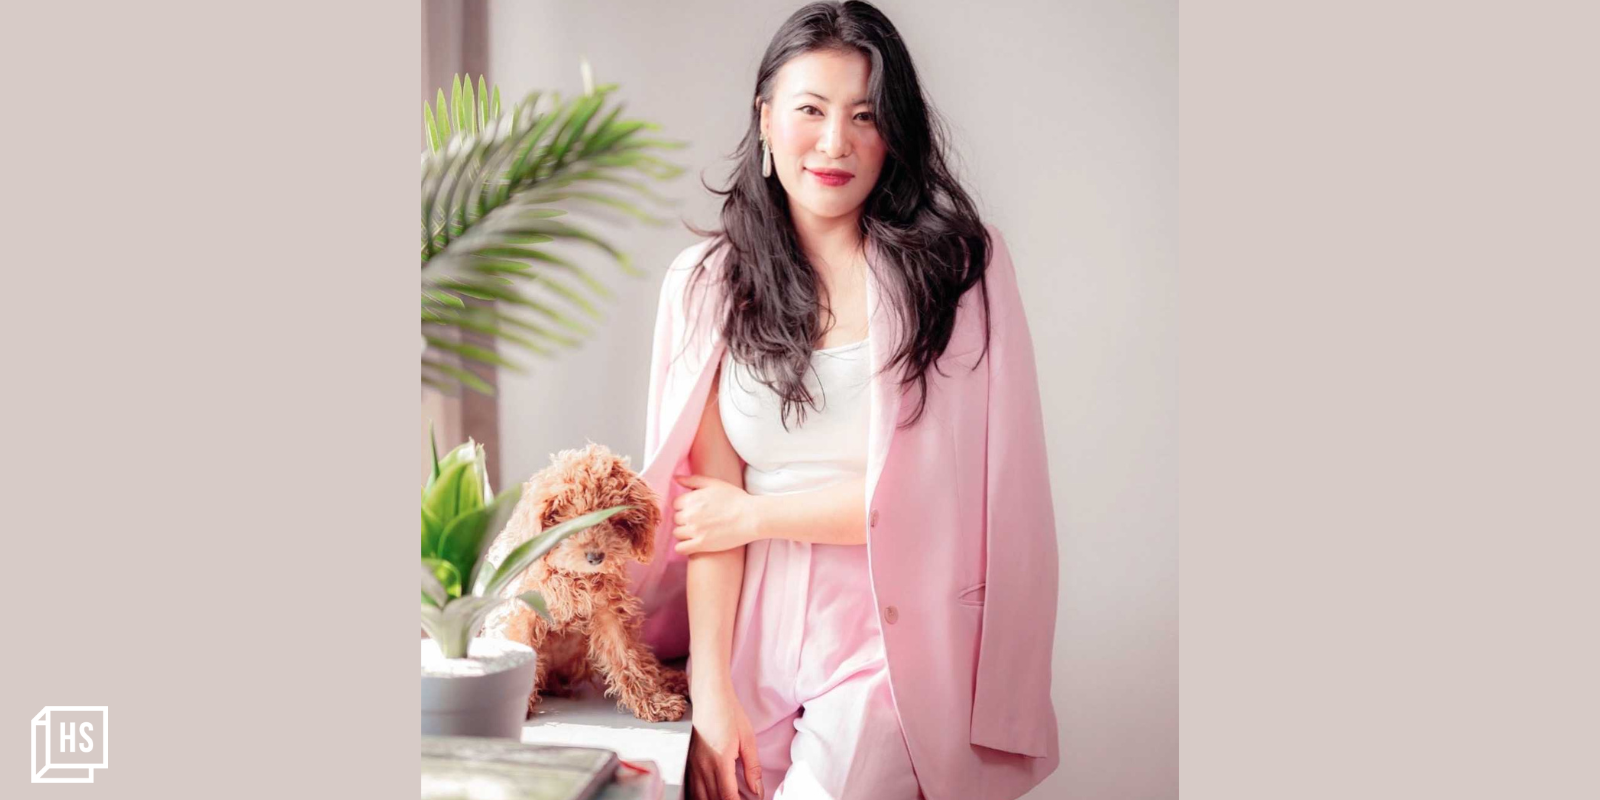 Meet the Naga woman entrepreneur who cracked the K-beauty business with Beauty Barn